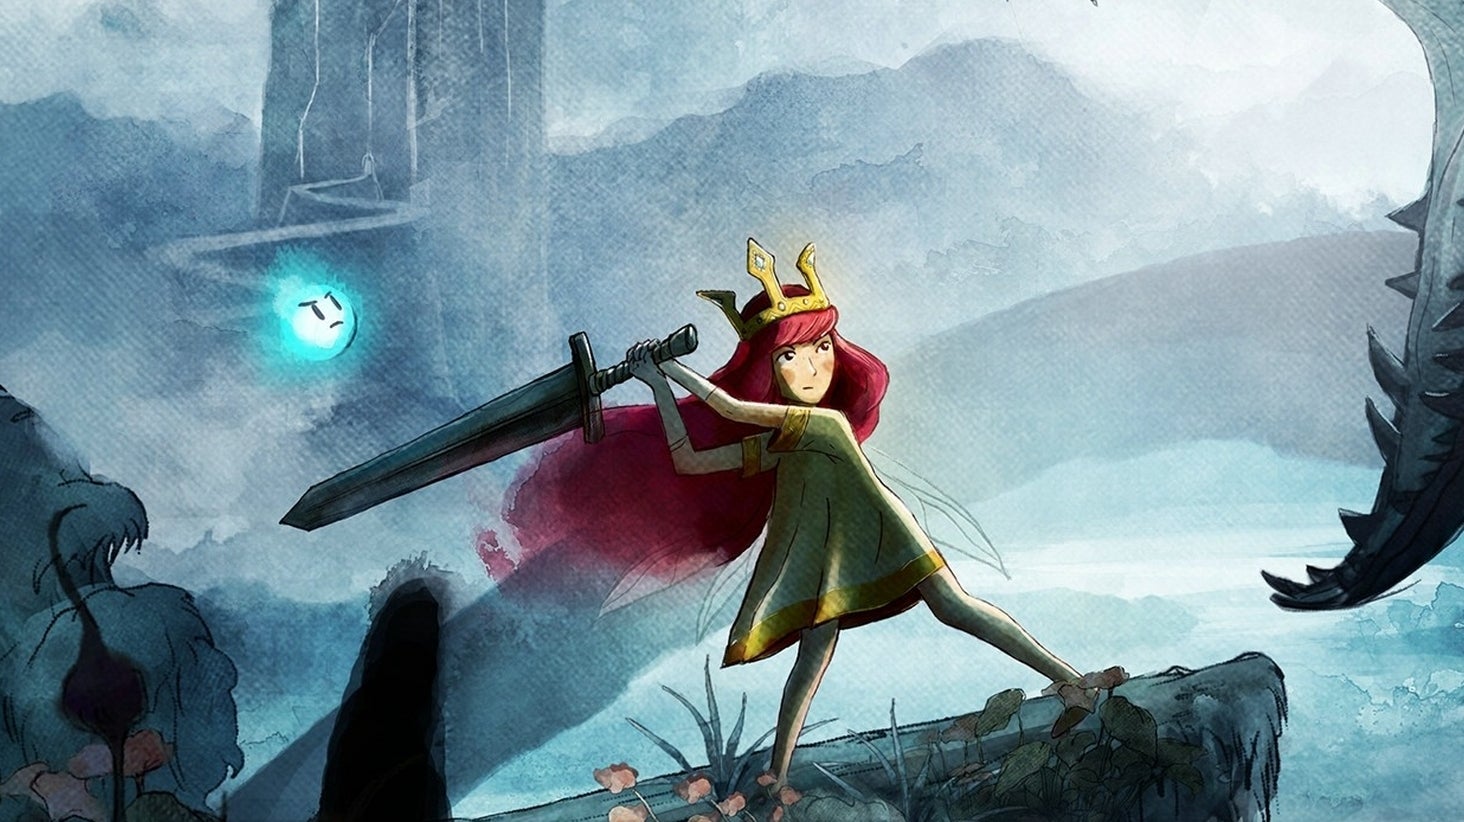 Image for The Double-A Team: We need more games like Child of Light